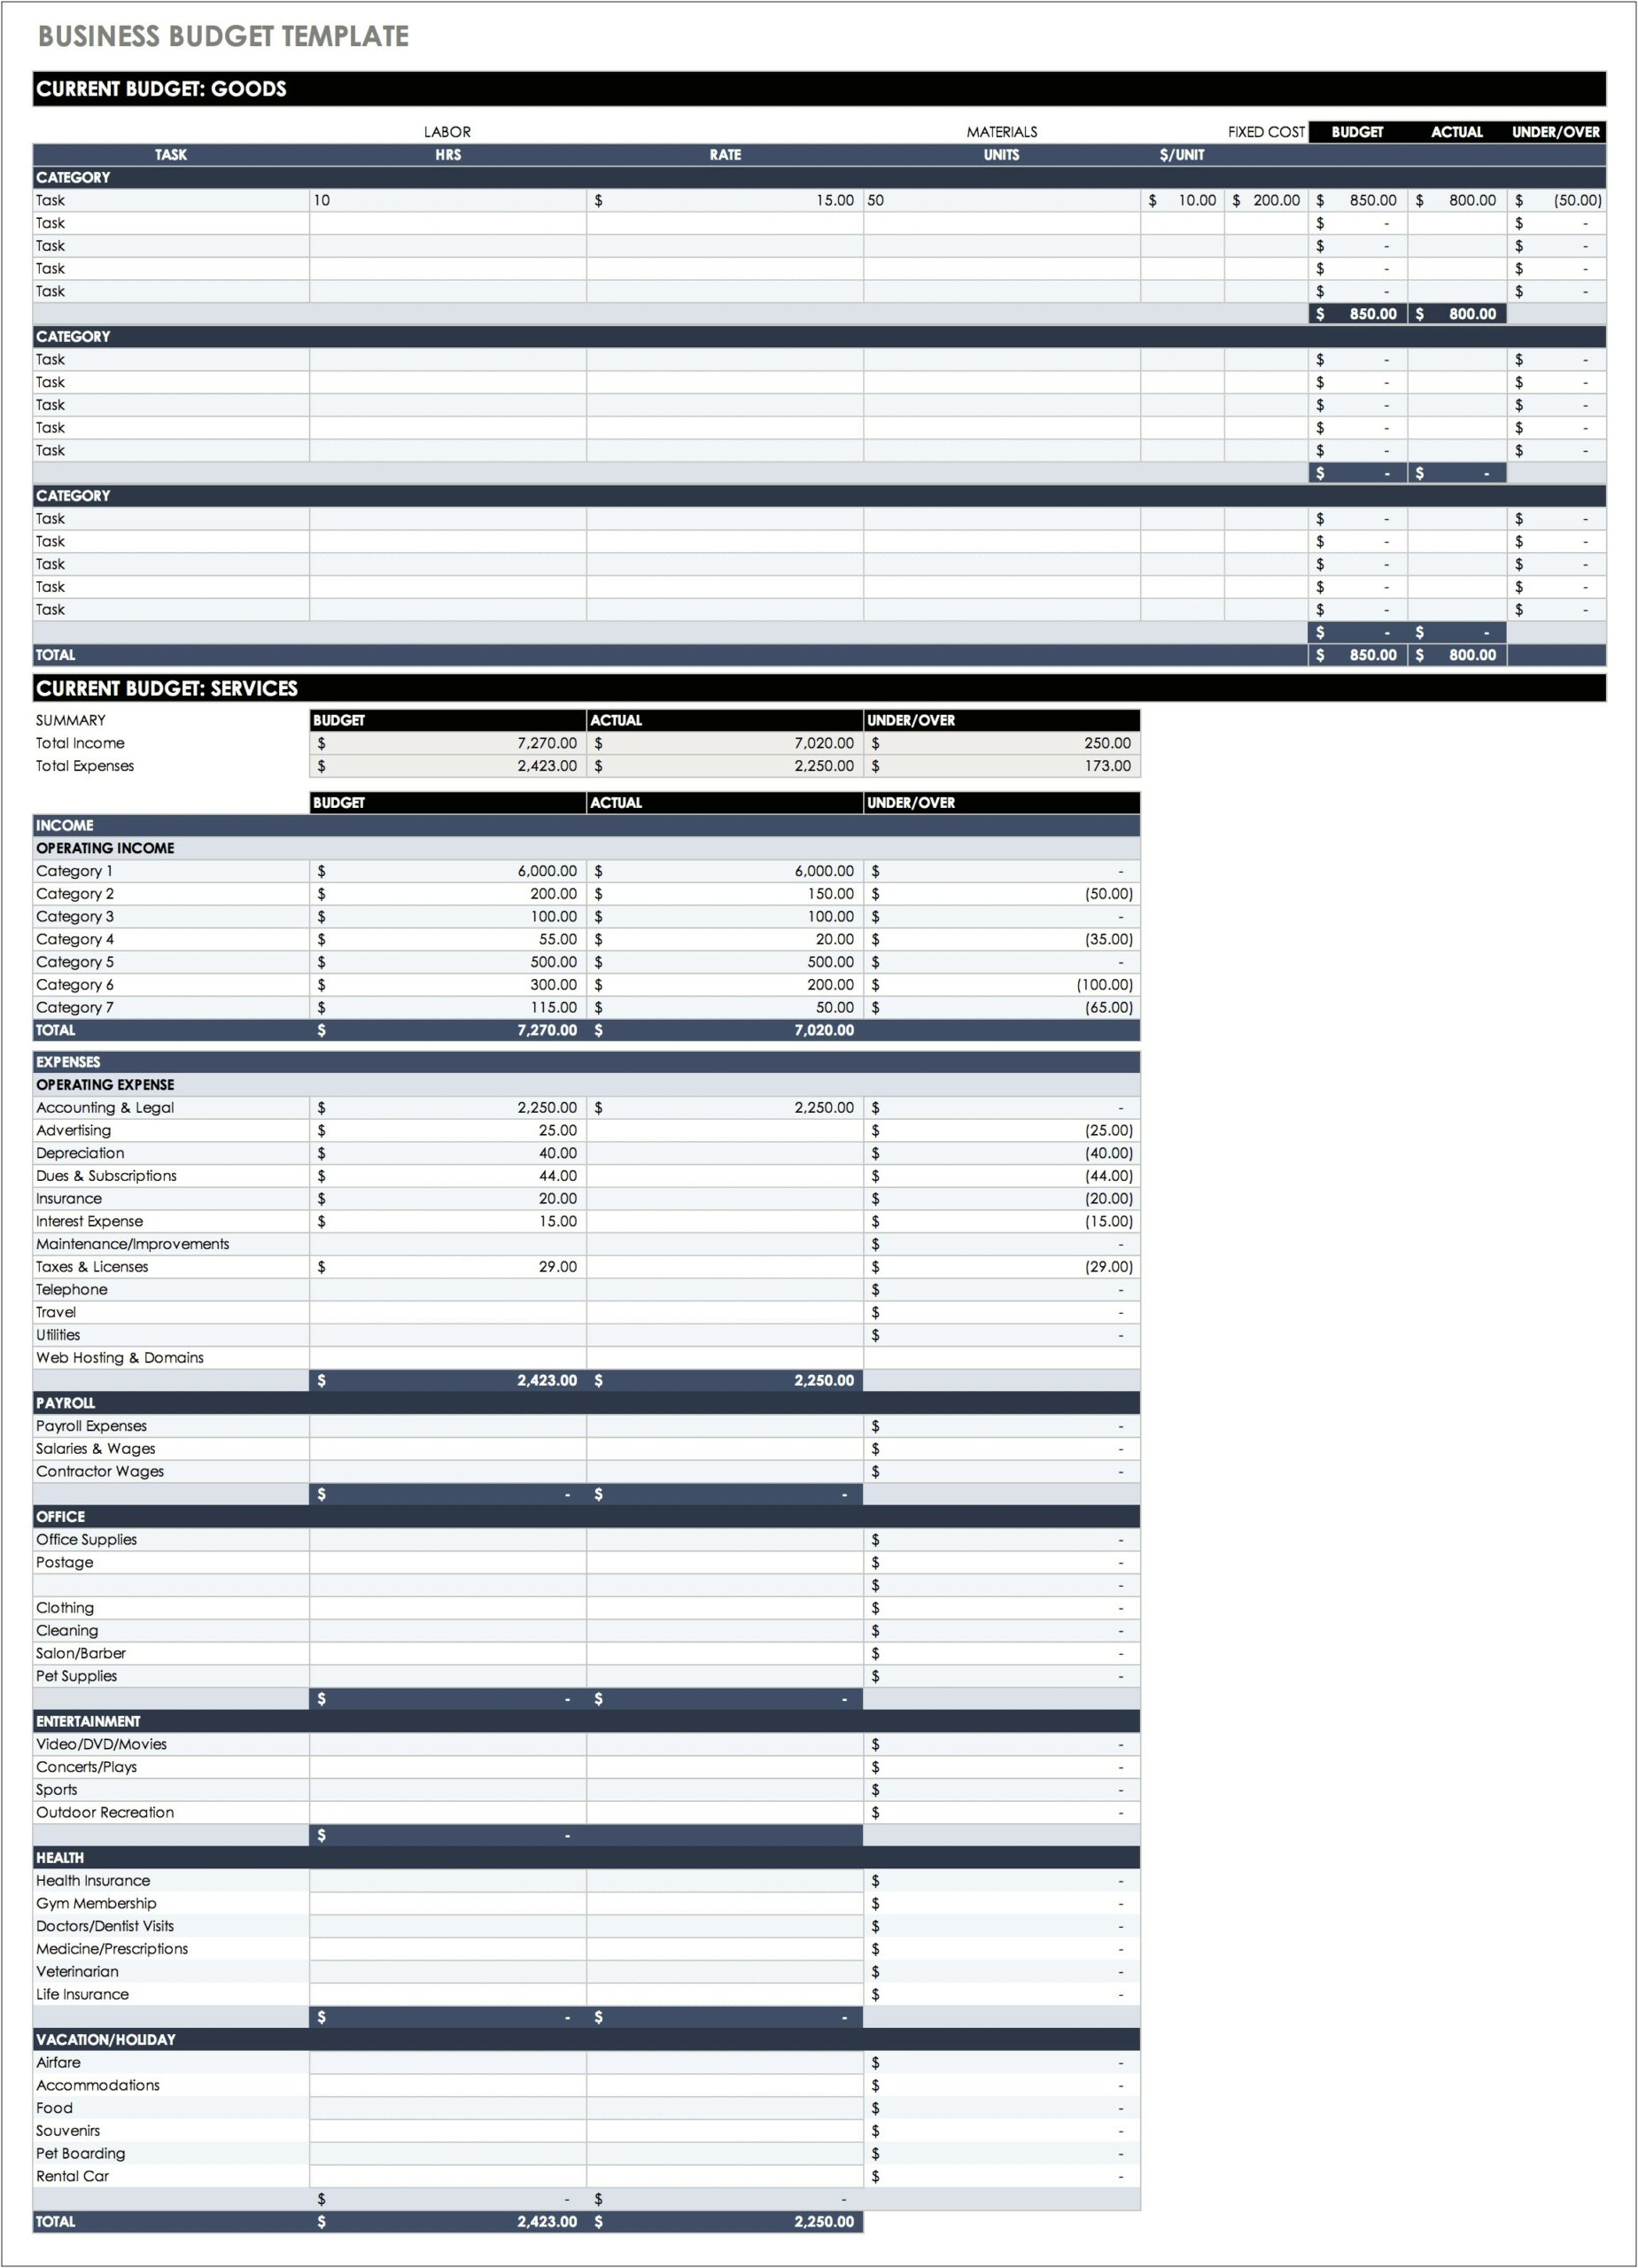 Free Online Retail Business Budget Template Excel